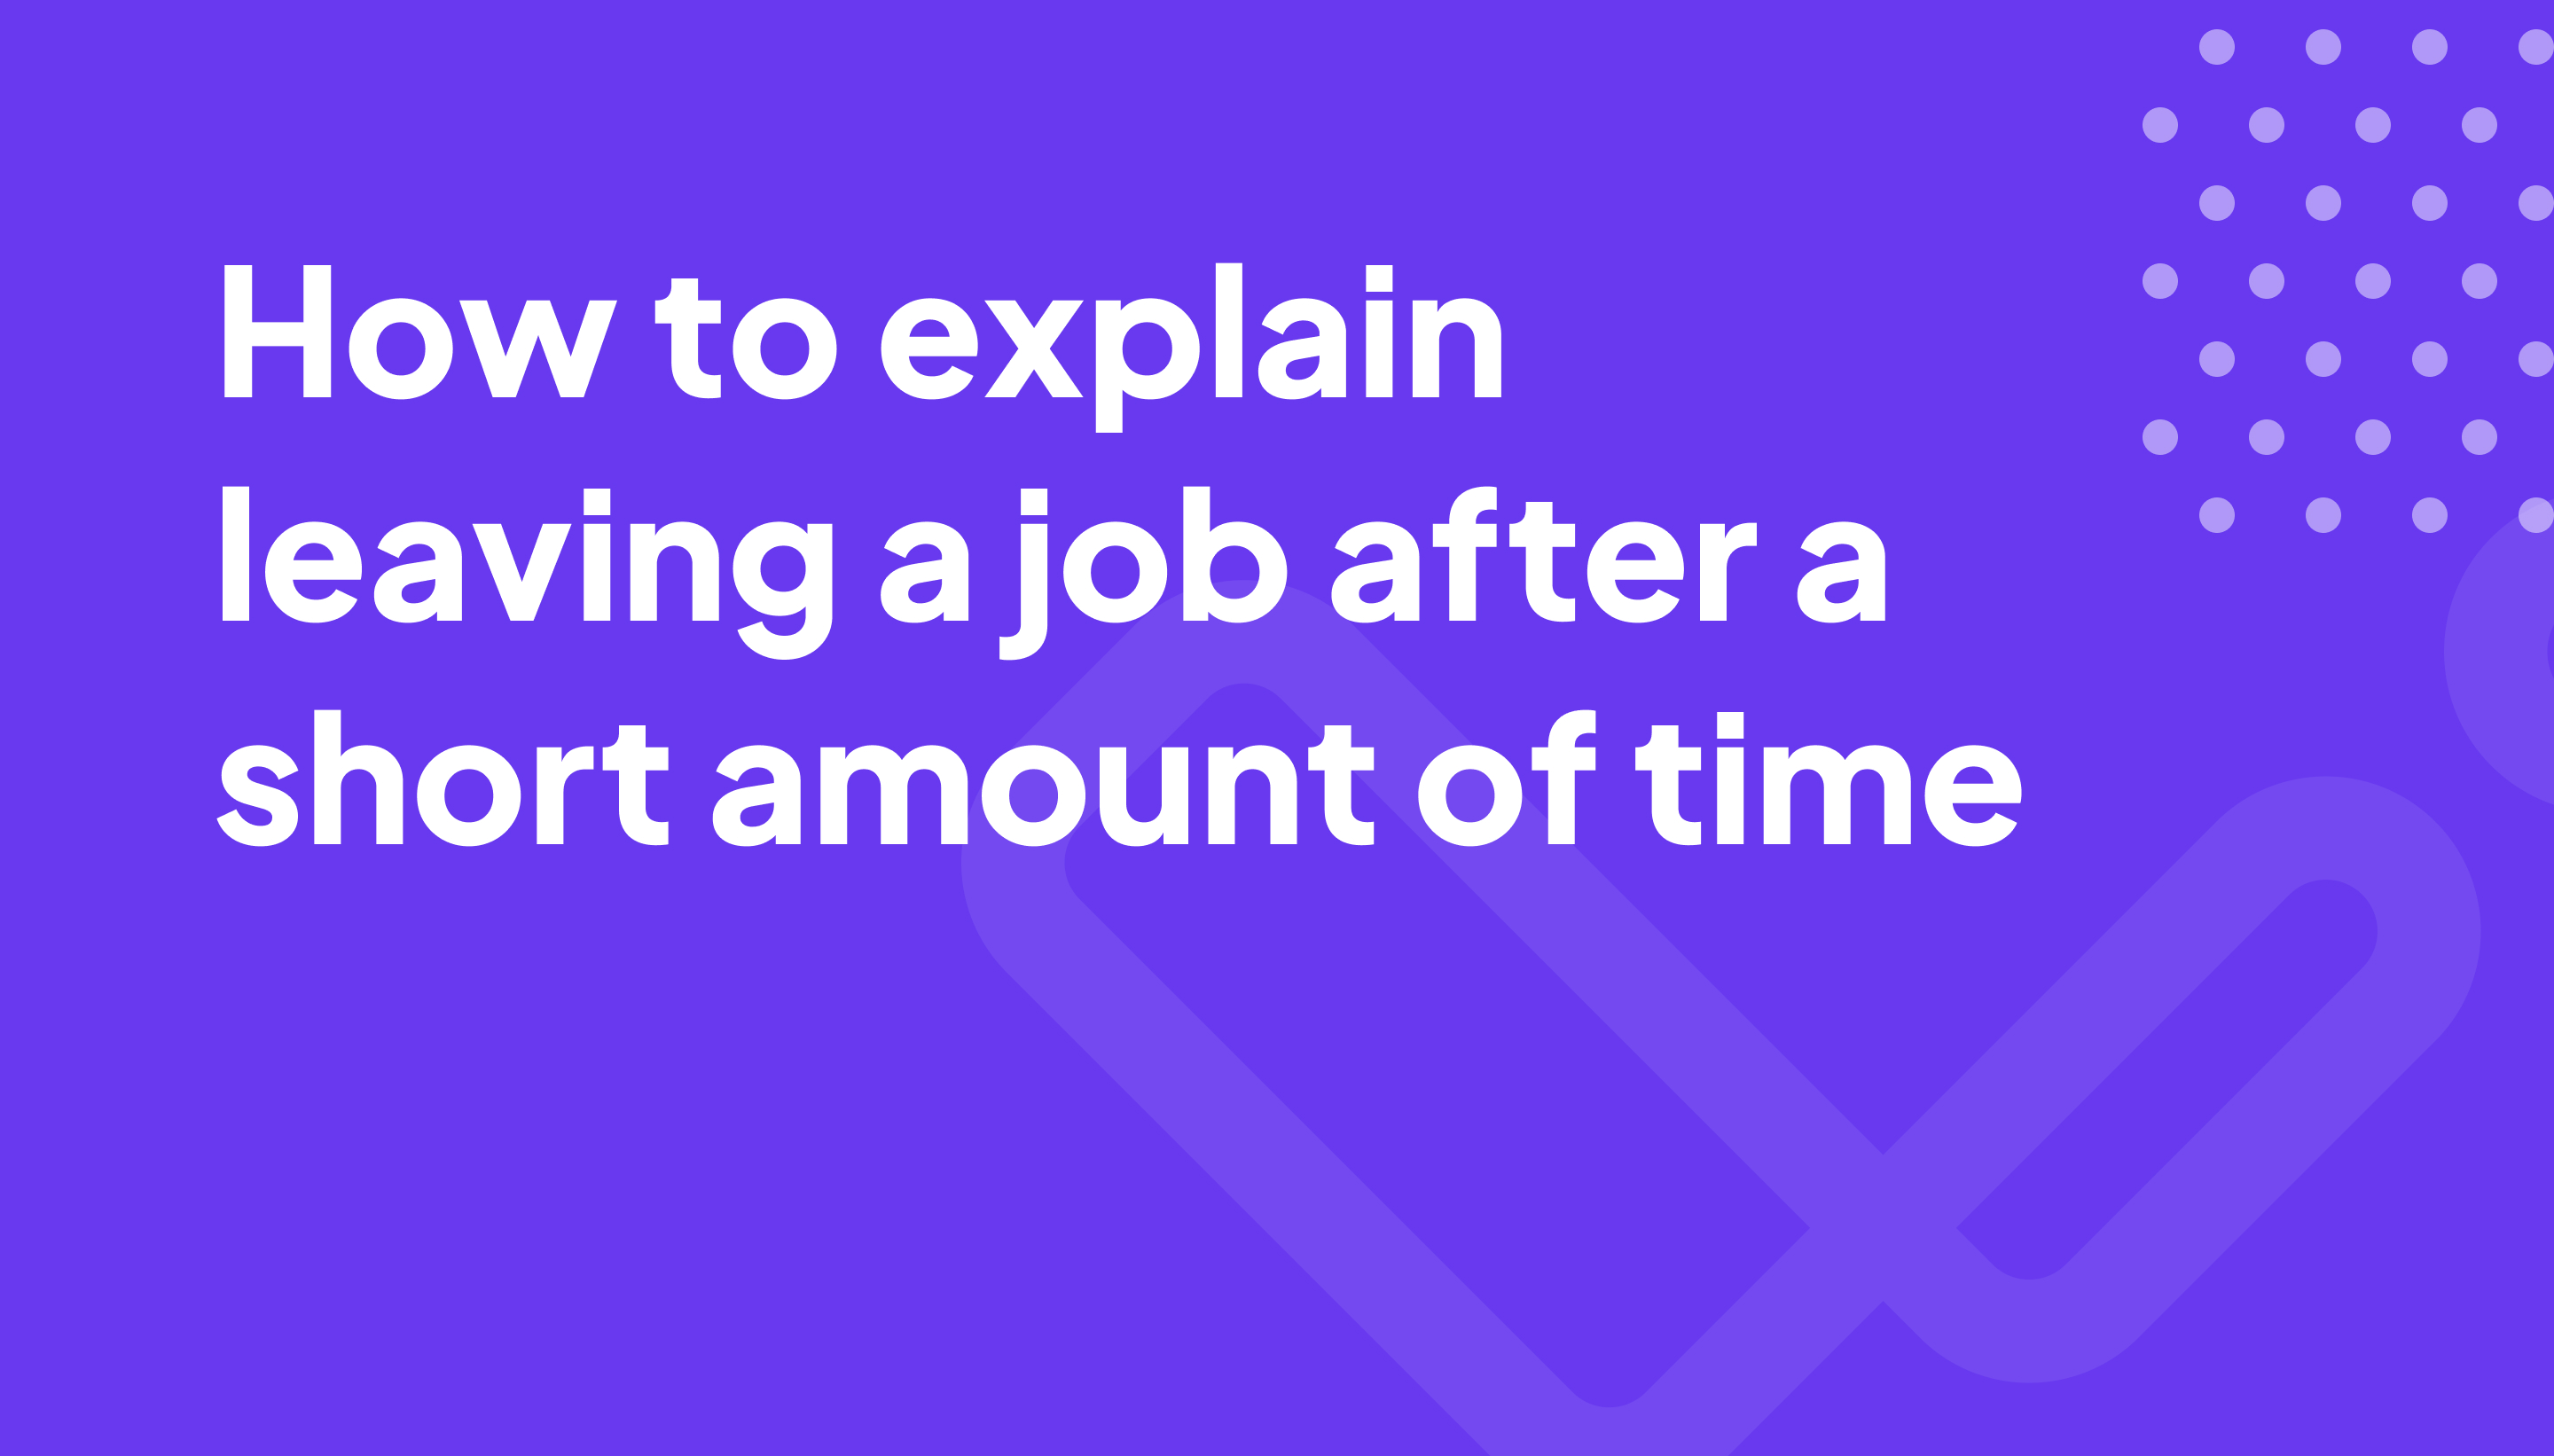 How to explain leaving a job after a short amount of time